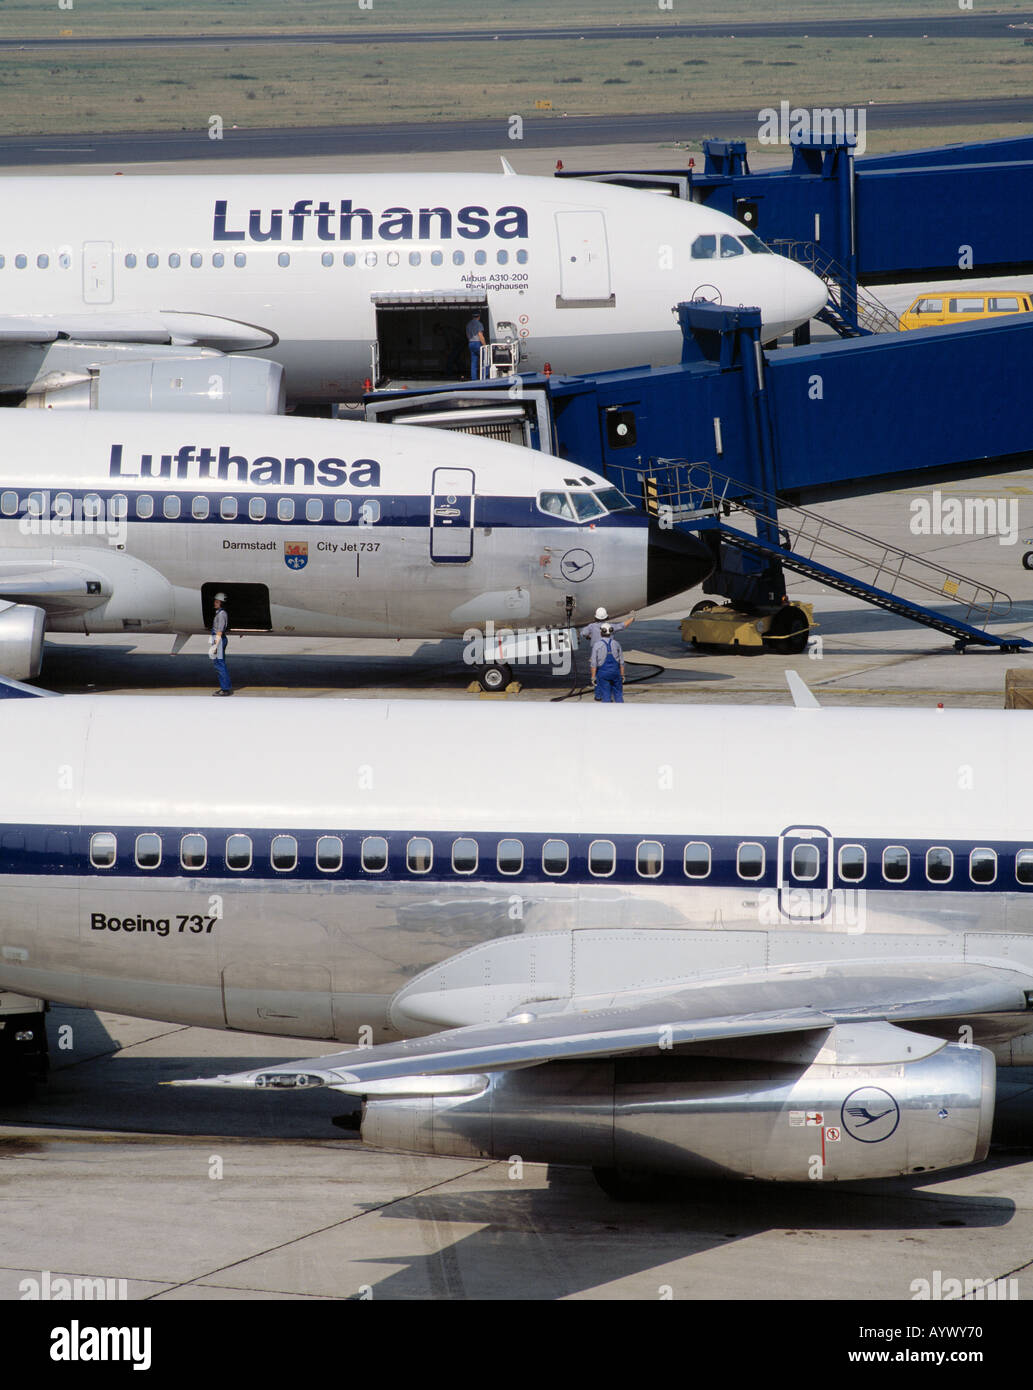 D-Duesseldorf, Rhine, North Rhine-Westphalia, airport, aeroplanes during clearance on terminals, Lufthansa, Lufthansa aeroplane, Lufthansa fleet, City Jet 737, Boeing, jet aircraft, passenger plane, air traffic, airplane, aircraft, tourism, transport, tra Stock Photo